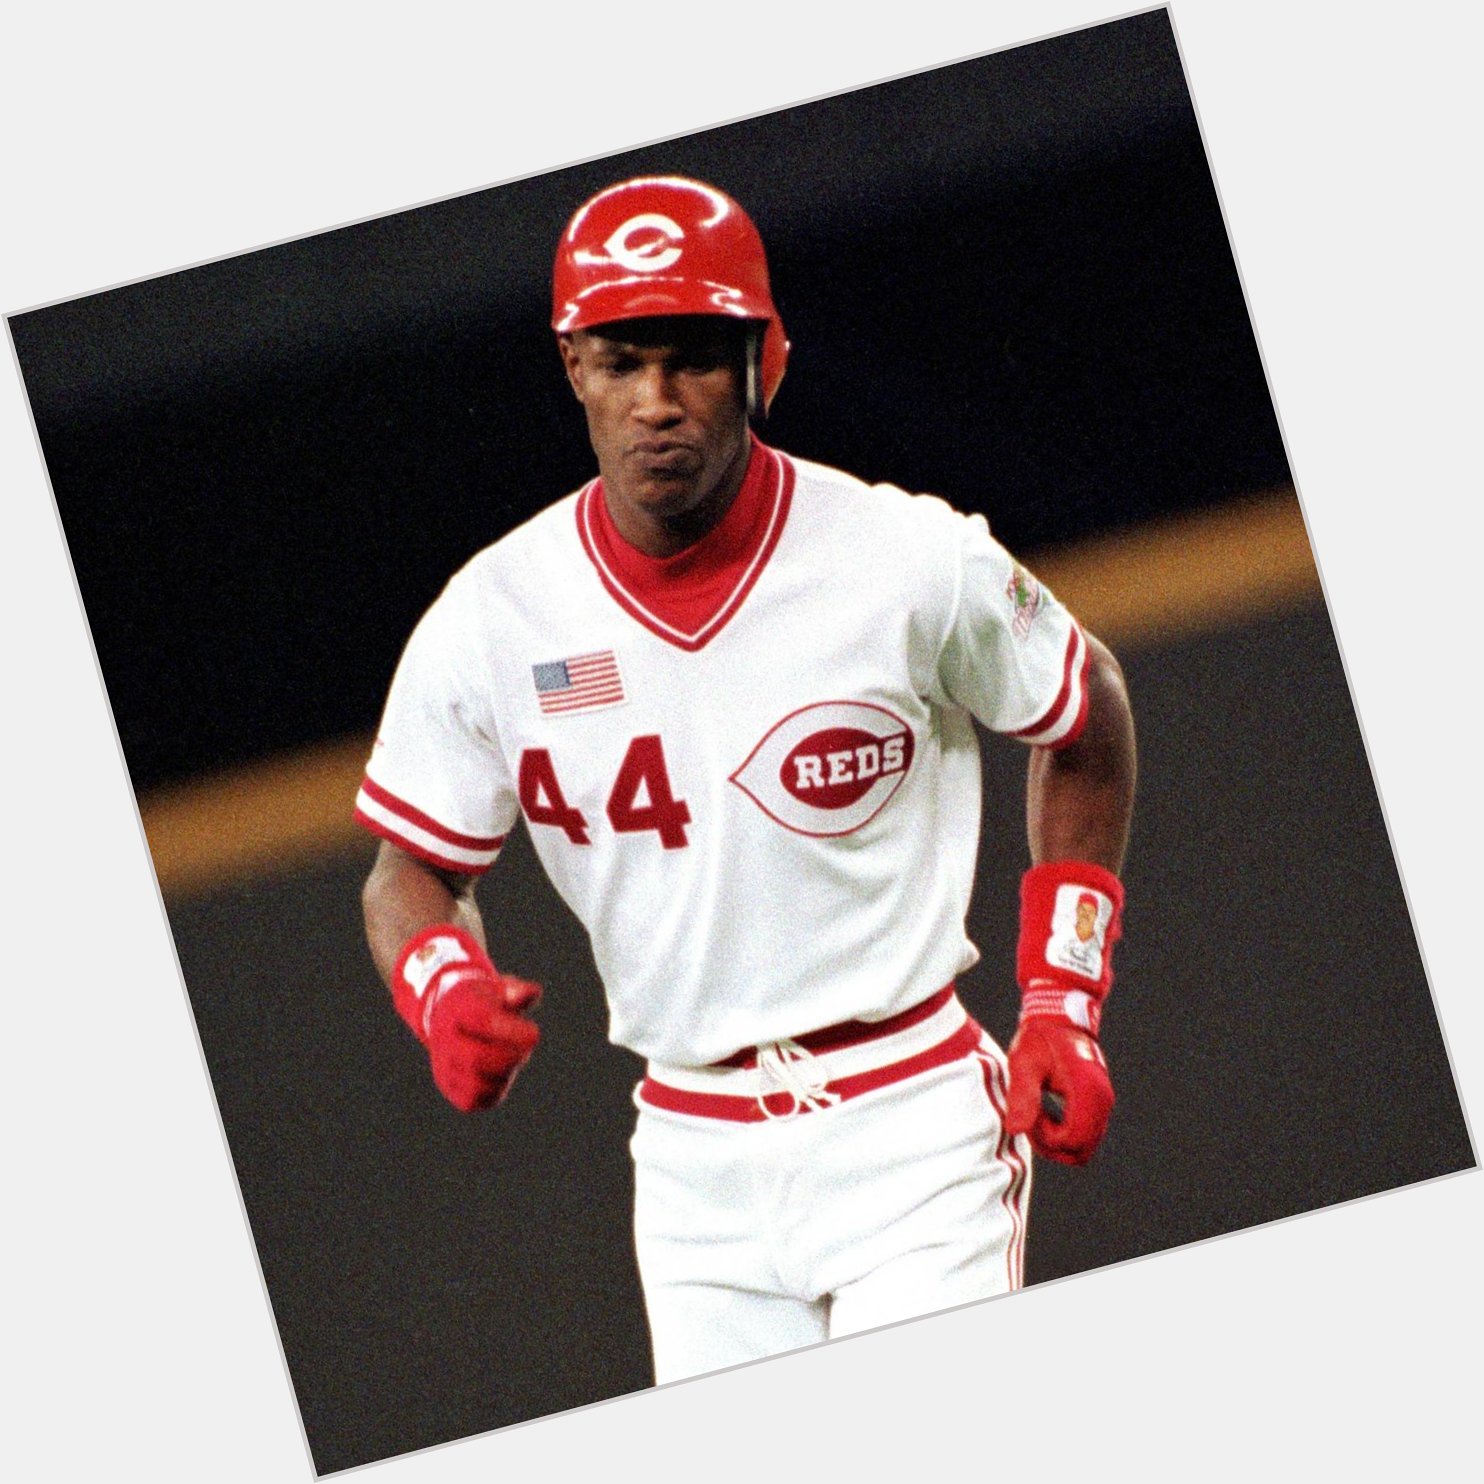 Happy Birthday to Eric Davis! Come see the Reds Hall of Famer on Monday, July 13th at Cincy Sports Fest 2015. 